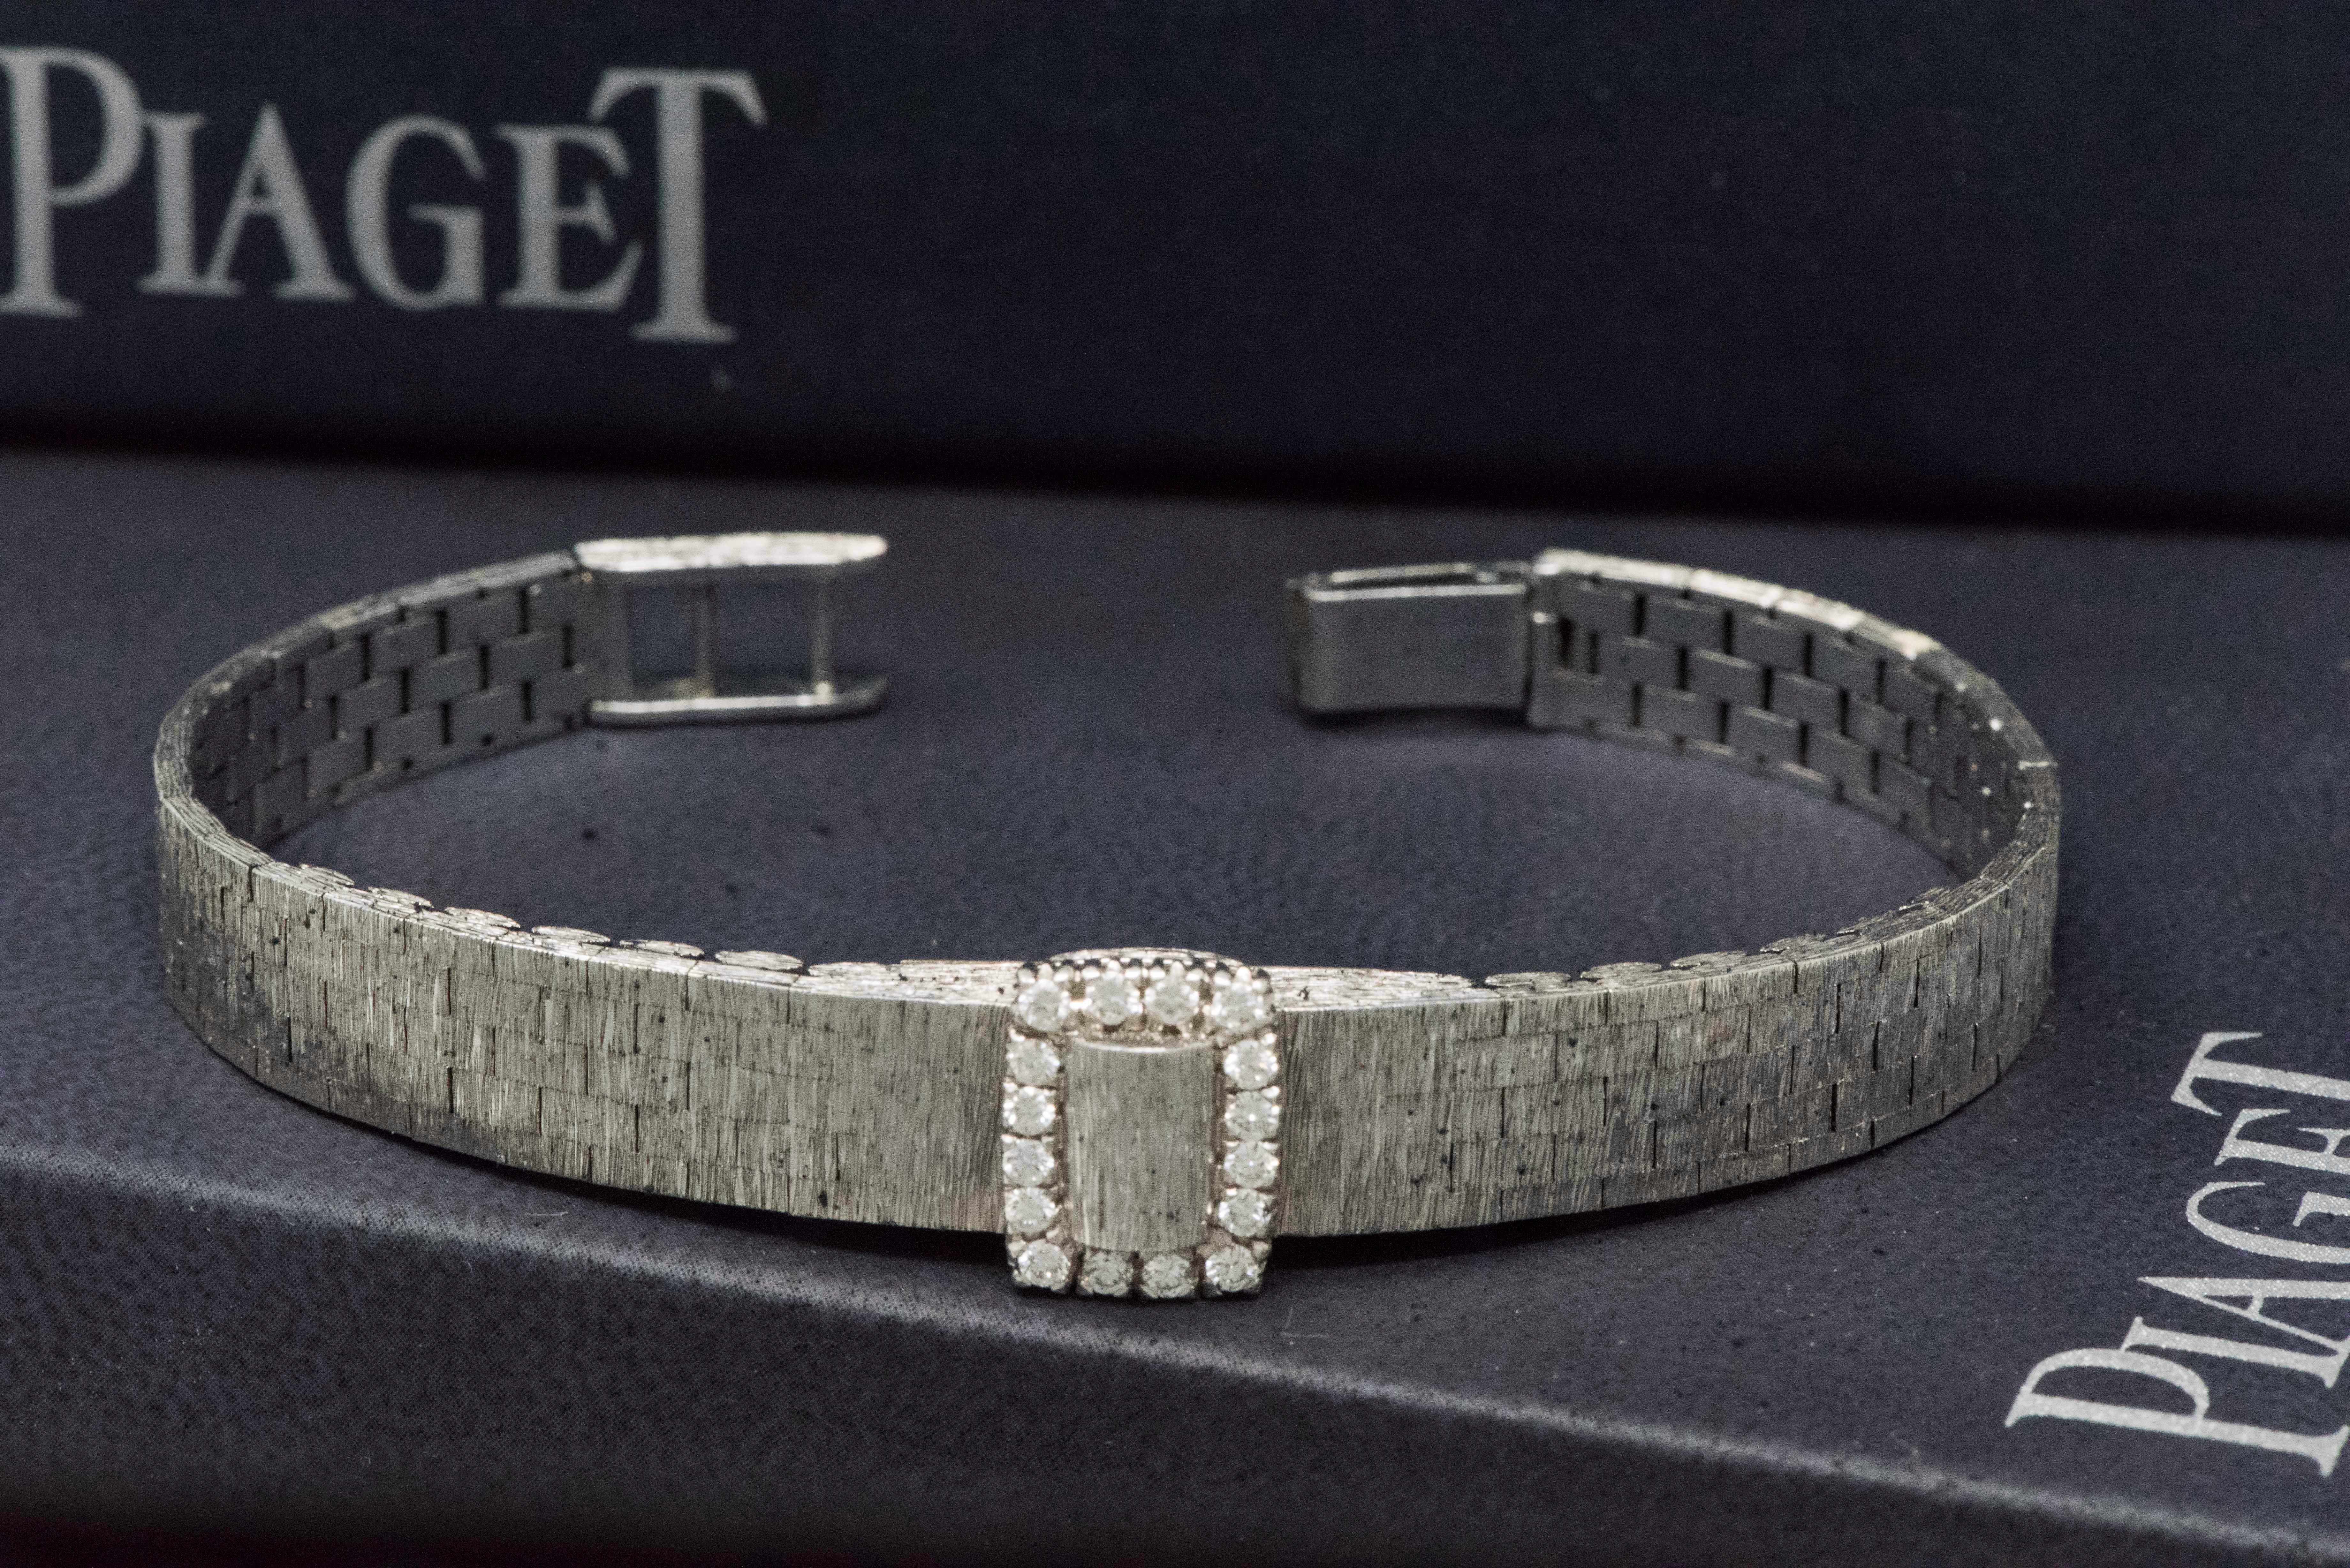 Rare Piaget Diamond Set Concealed 18kt White Gold Bracelet Wristwatch 
Circa 1960s

The present watch is a very rare 1960s Diamond Set 18kt white gold textured concealed Piaget bracelet wrist watch.
At this time, Piaget was experimenting with many